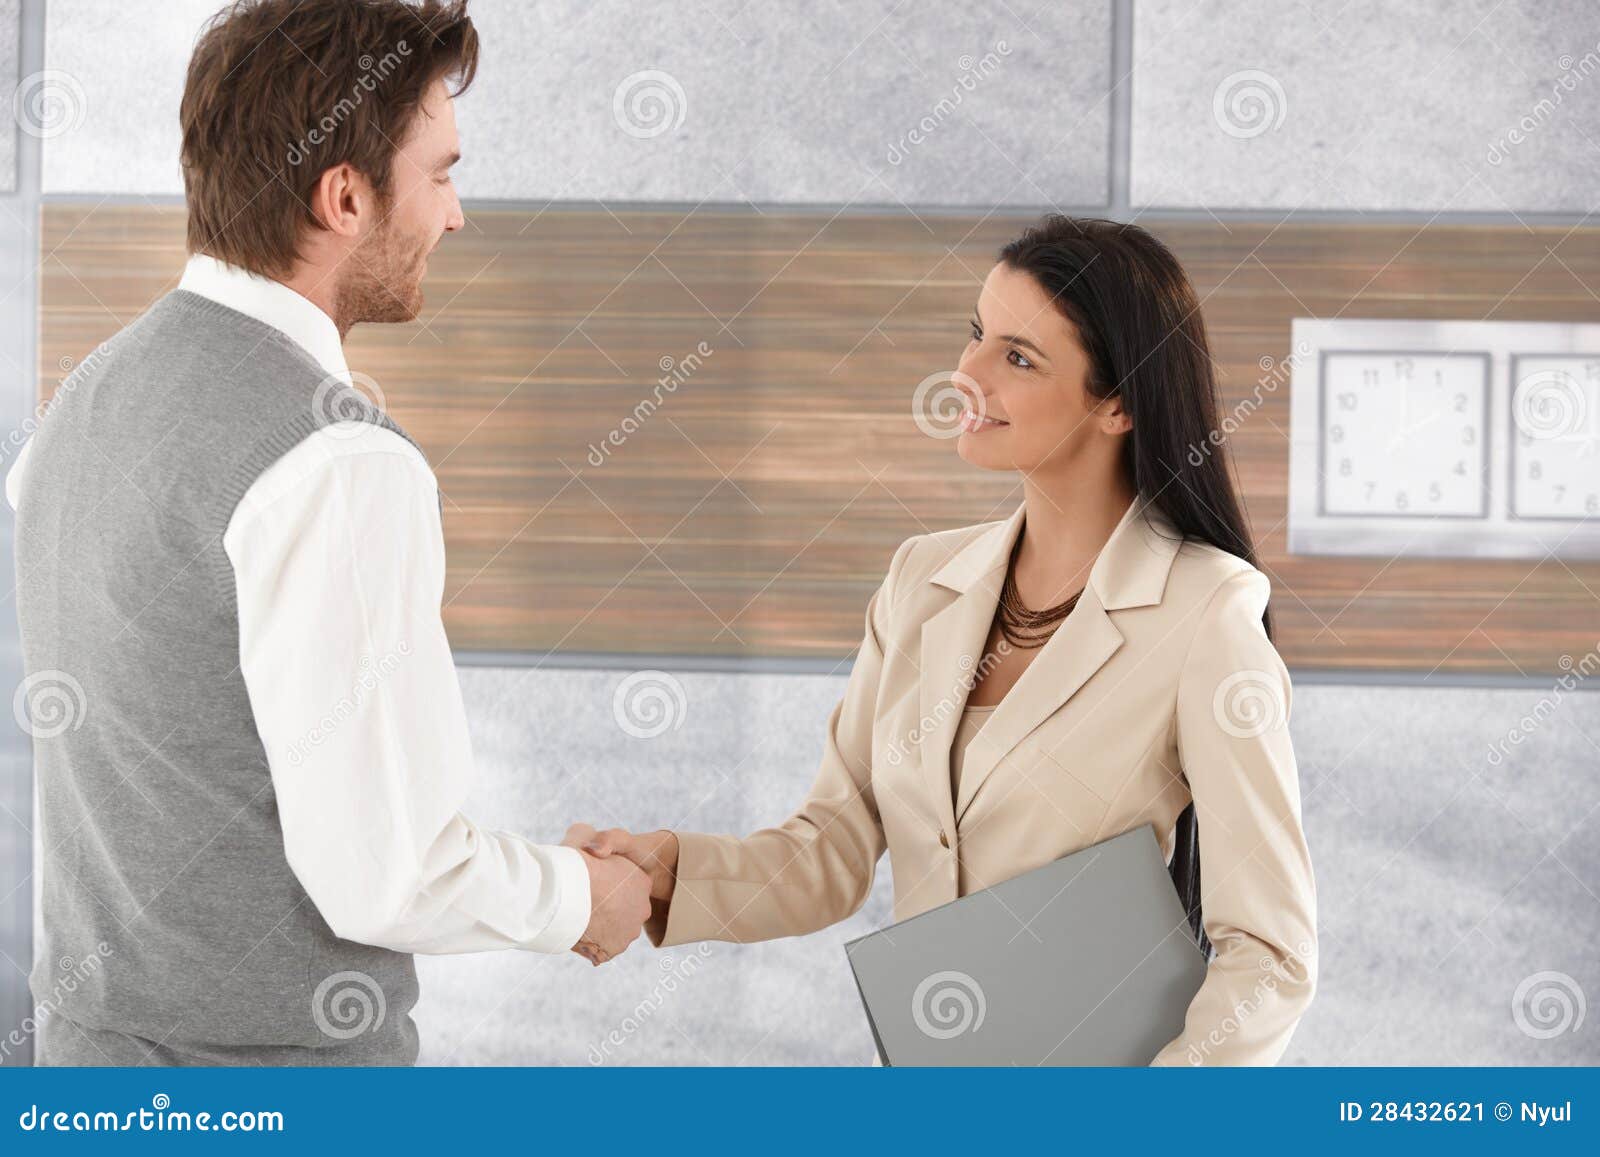 young businesspeople shaking hands smiling